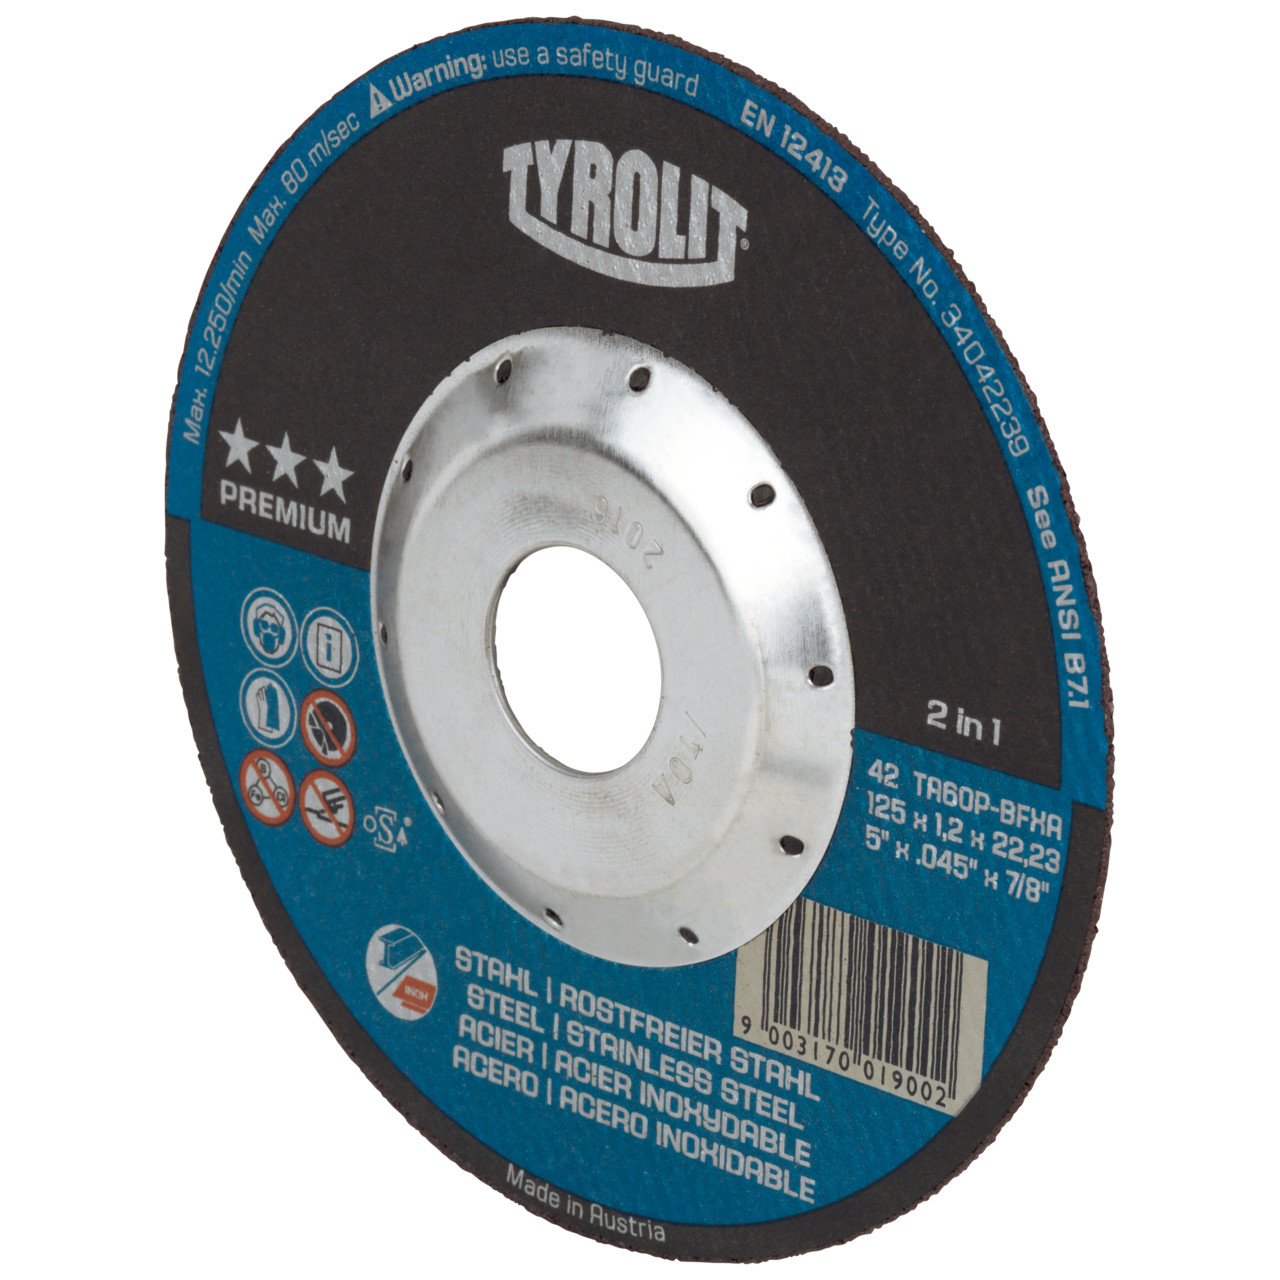 Tyrolit Cut-off wheels DxUxH 125x1.2x22.23 Super-thin cut-off wheels for steel and stainless steel, shape: 42 - offset version, Art. 34472852